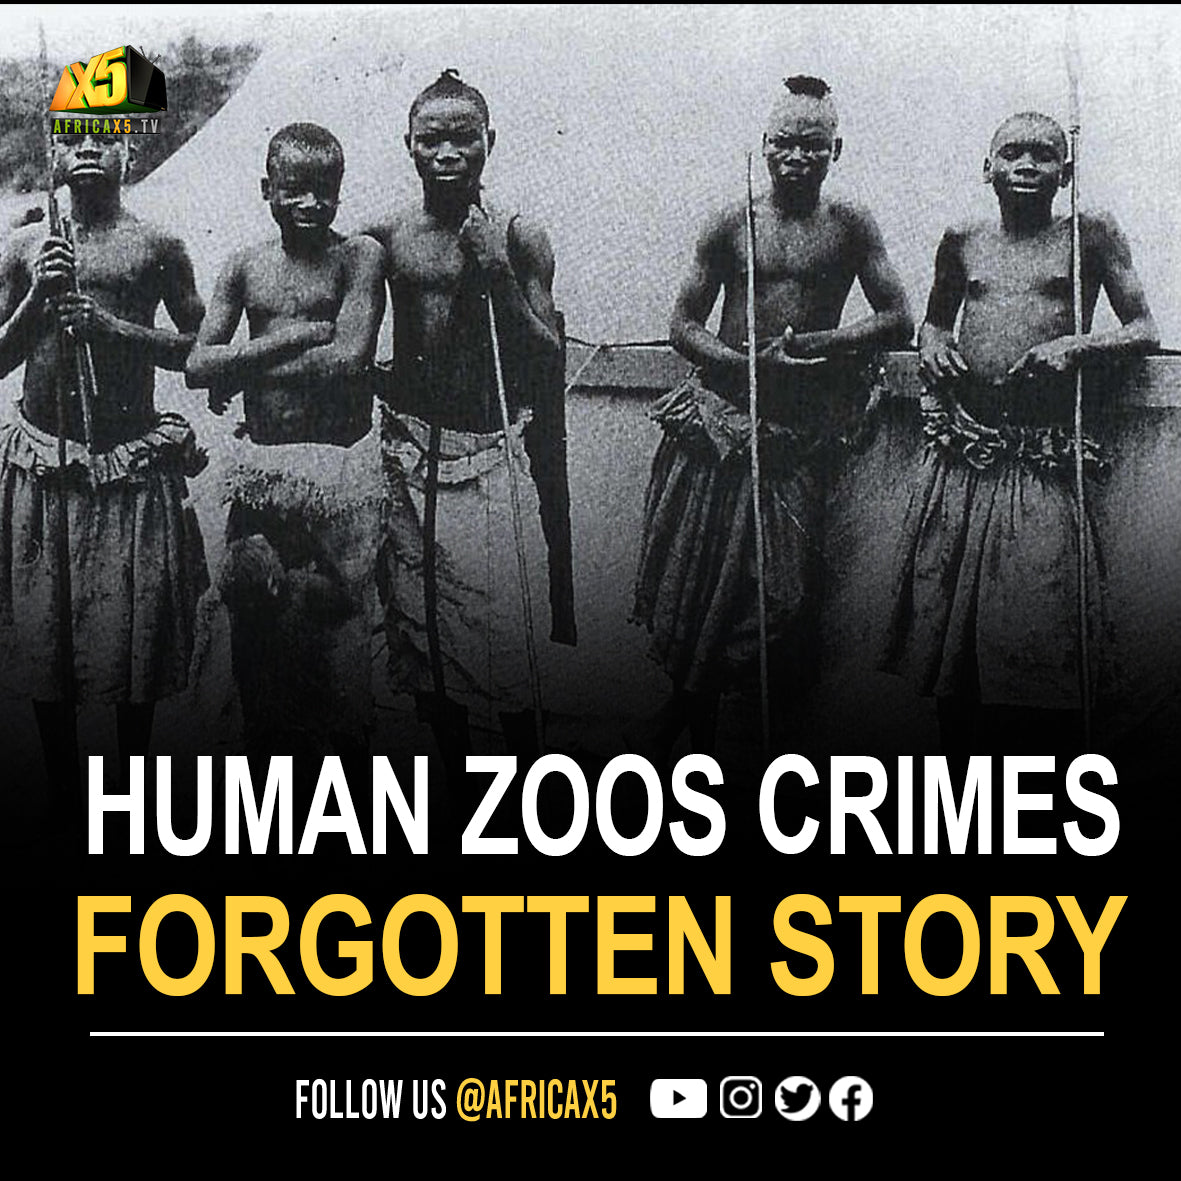 The Forgotten Story of Human Zoos – Crimes of the Colonial Era